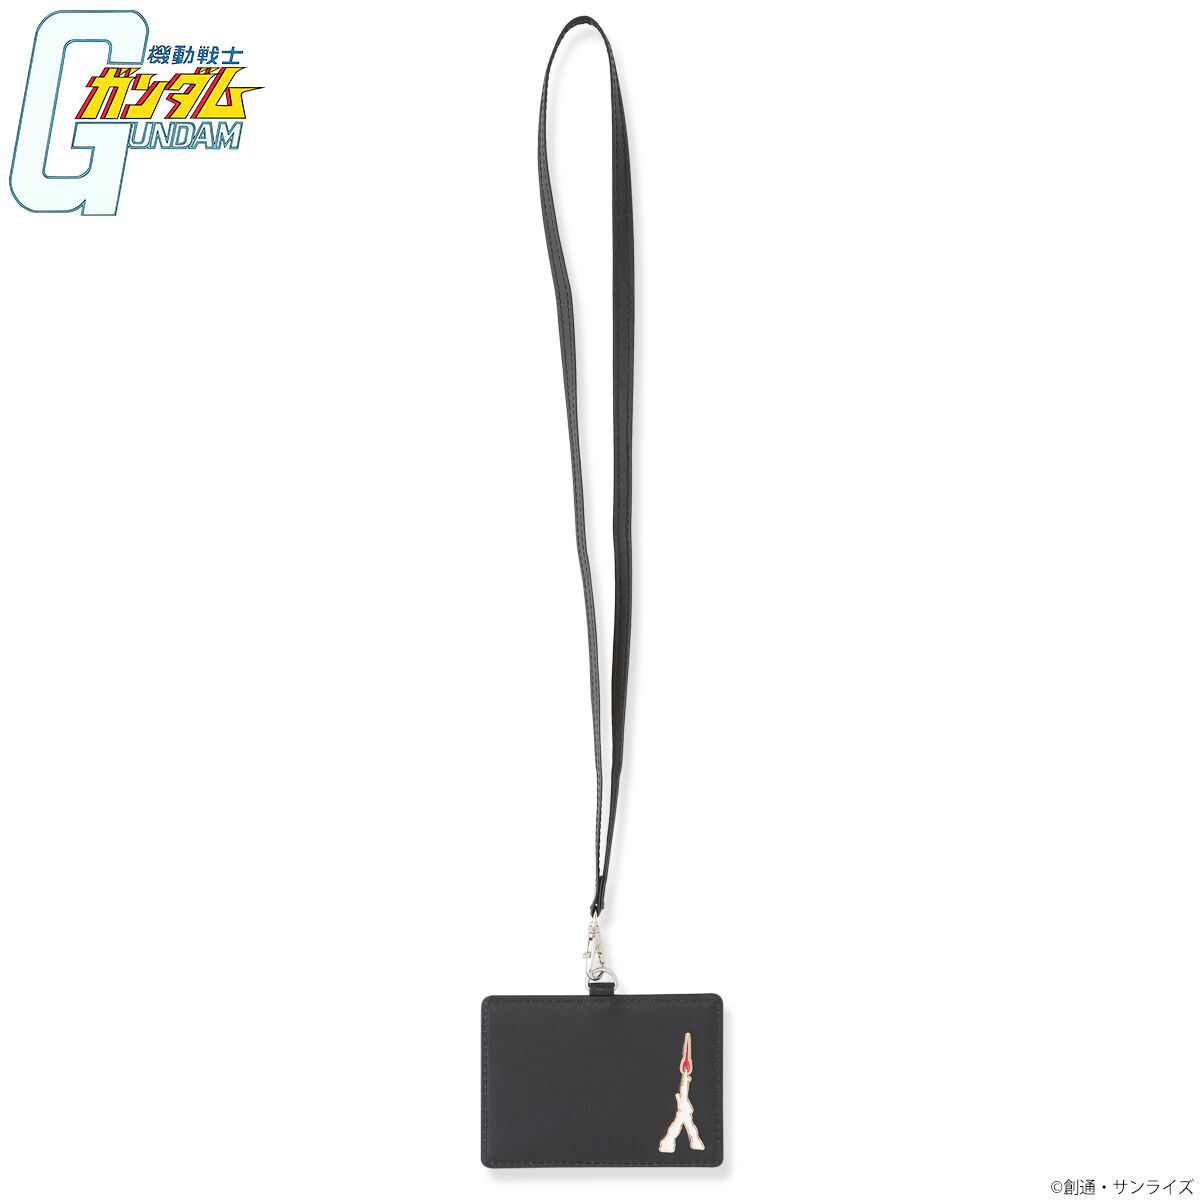 Mobile Suit Gundam The Last Shooting Neck Strap Hanging Employee ID Card Holder